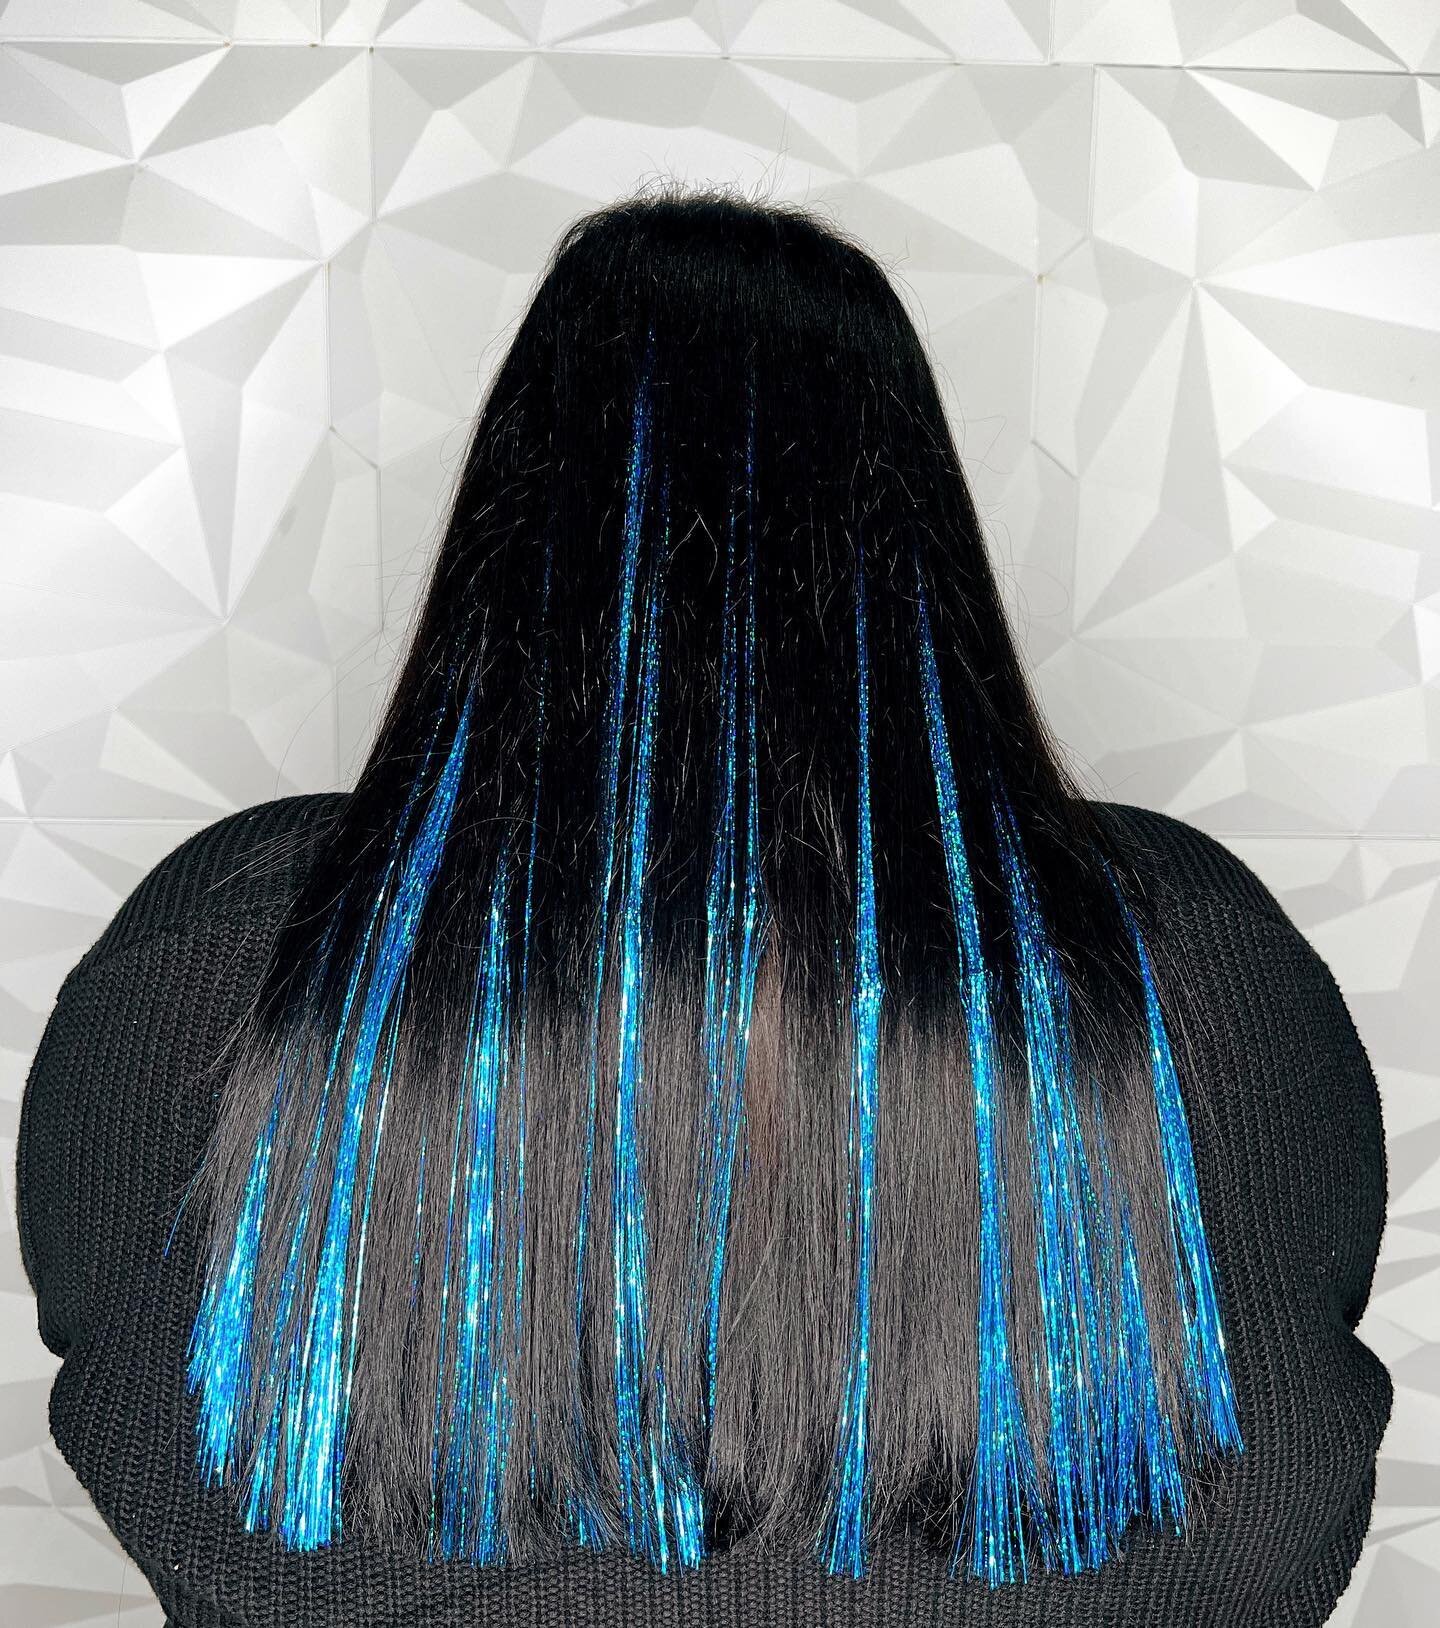 Living for the contrast between Alyssa&rsquo;s dark hair and the blue tinsel extensions. 💙🖤
.
Extensions by our stylist Gia
.
.
#tinselhair #tinselextensions #lexingtonma #bostonsalon #bluehair #bostonhairstylist  #bostonhair #hairsalonsboston #hai